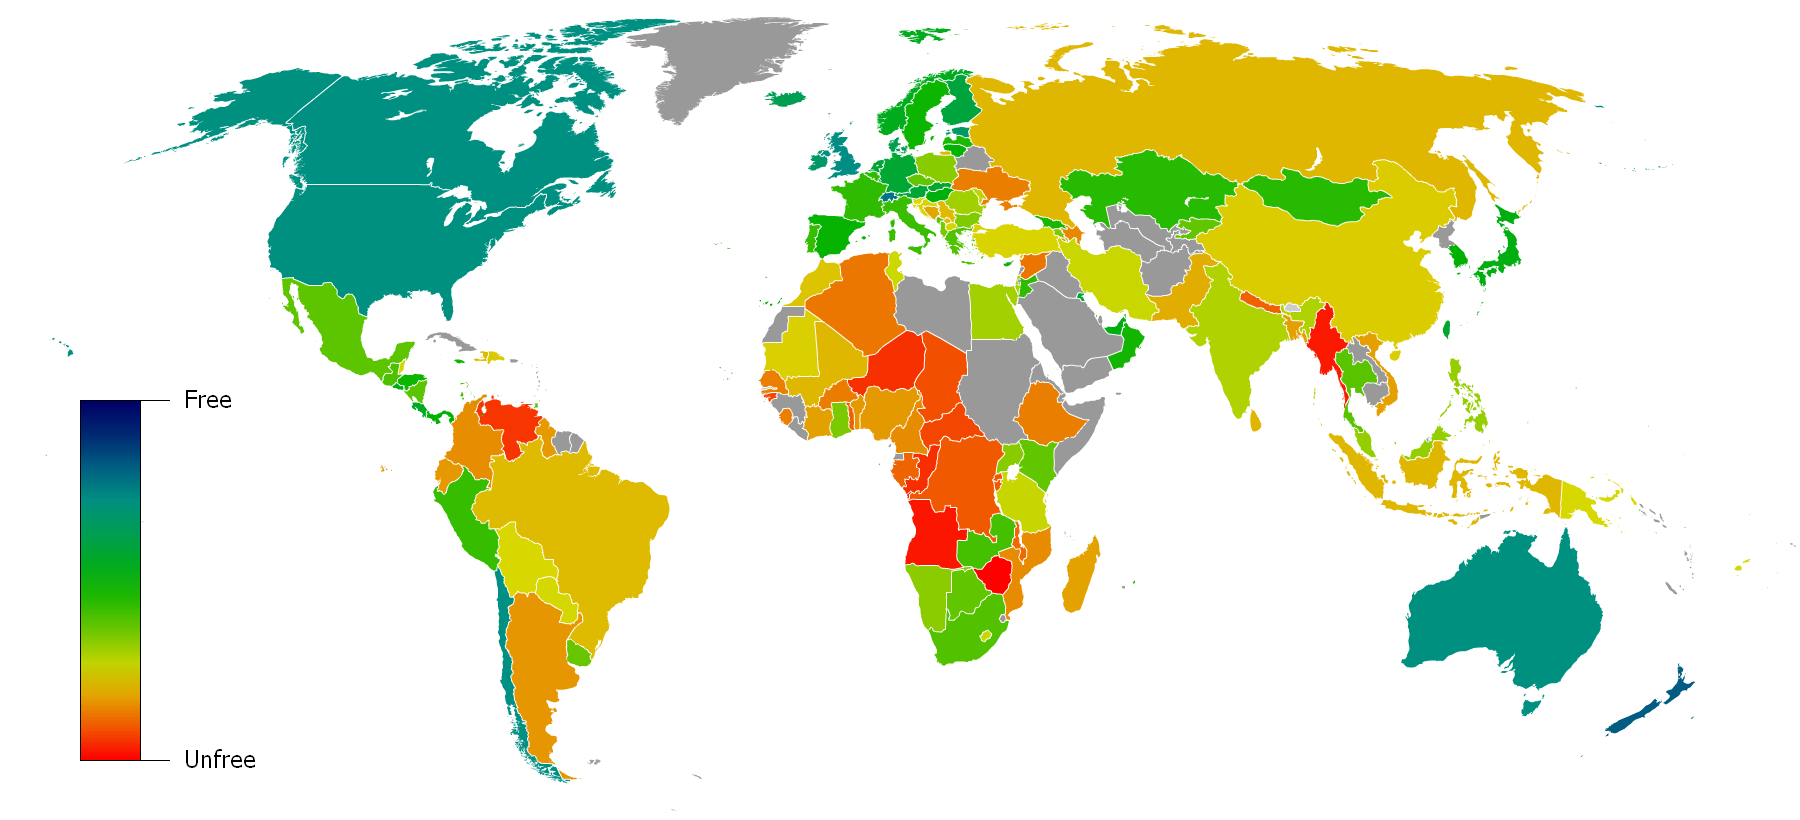 countries by economic freedom